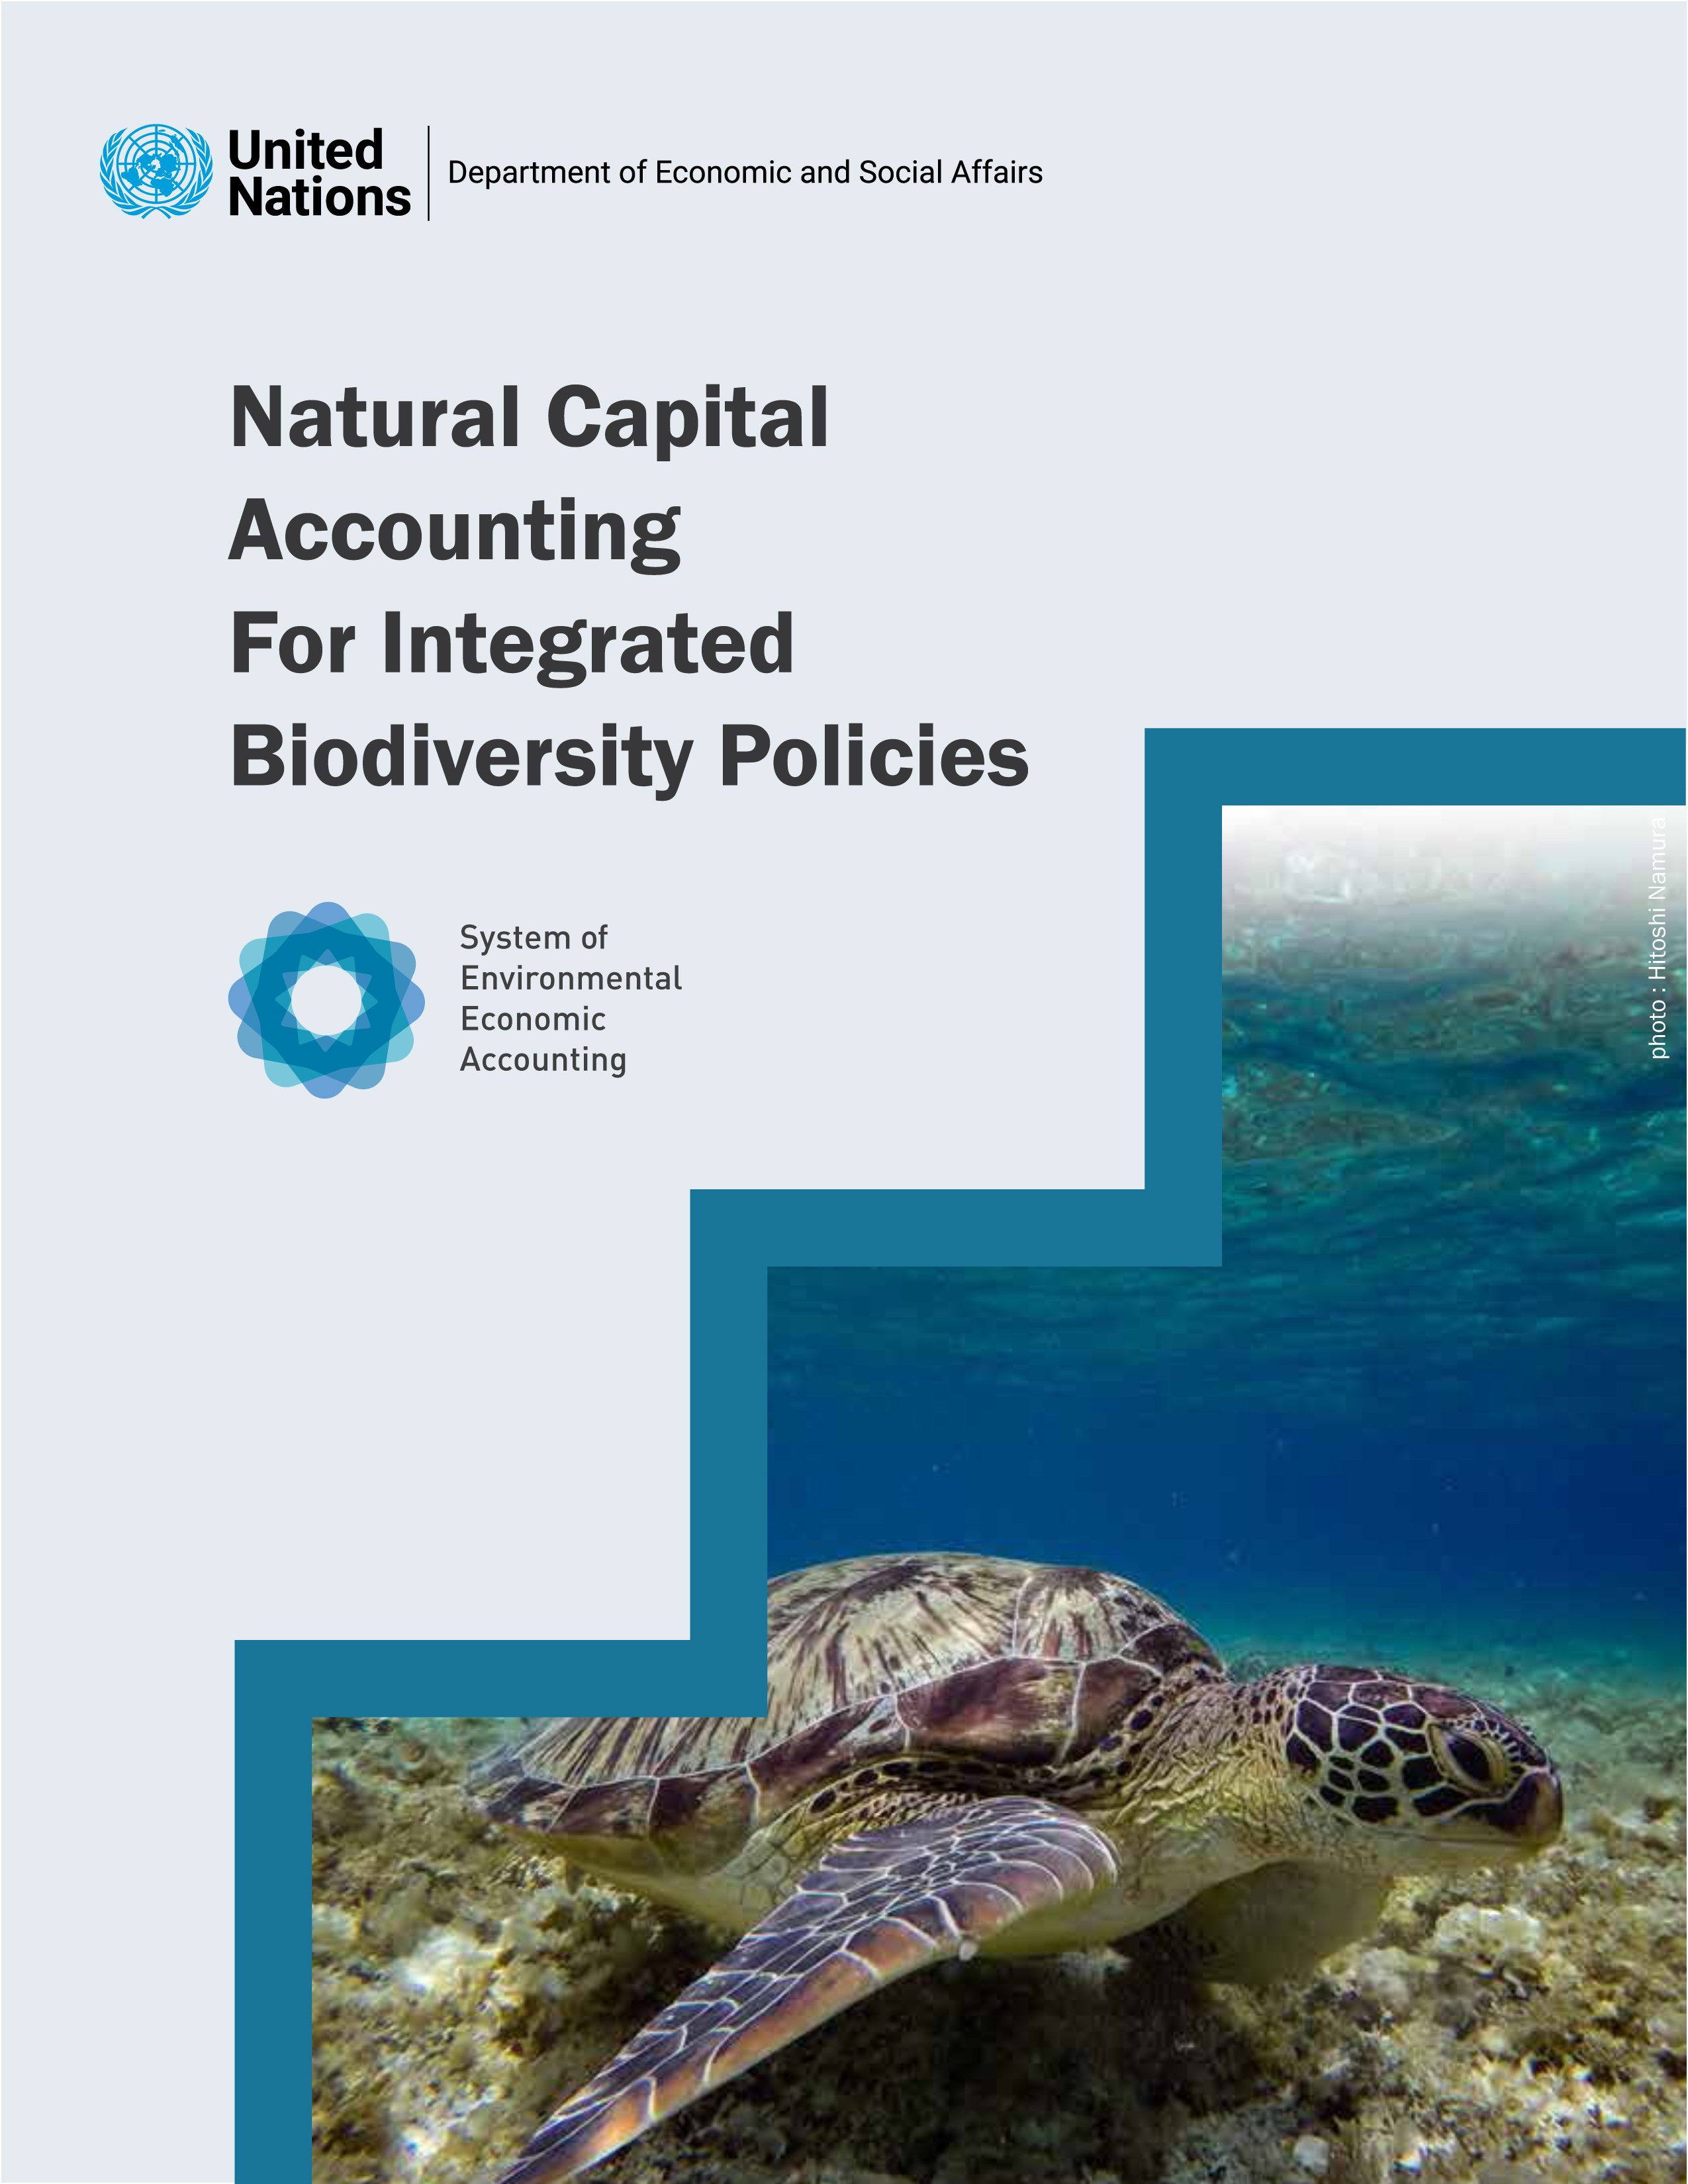 image of The Biodiversity policy response & instruments